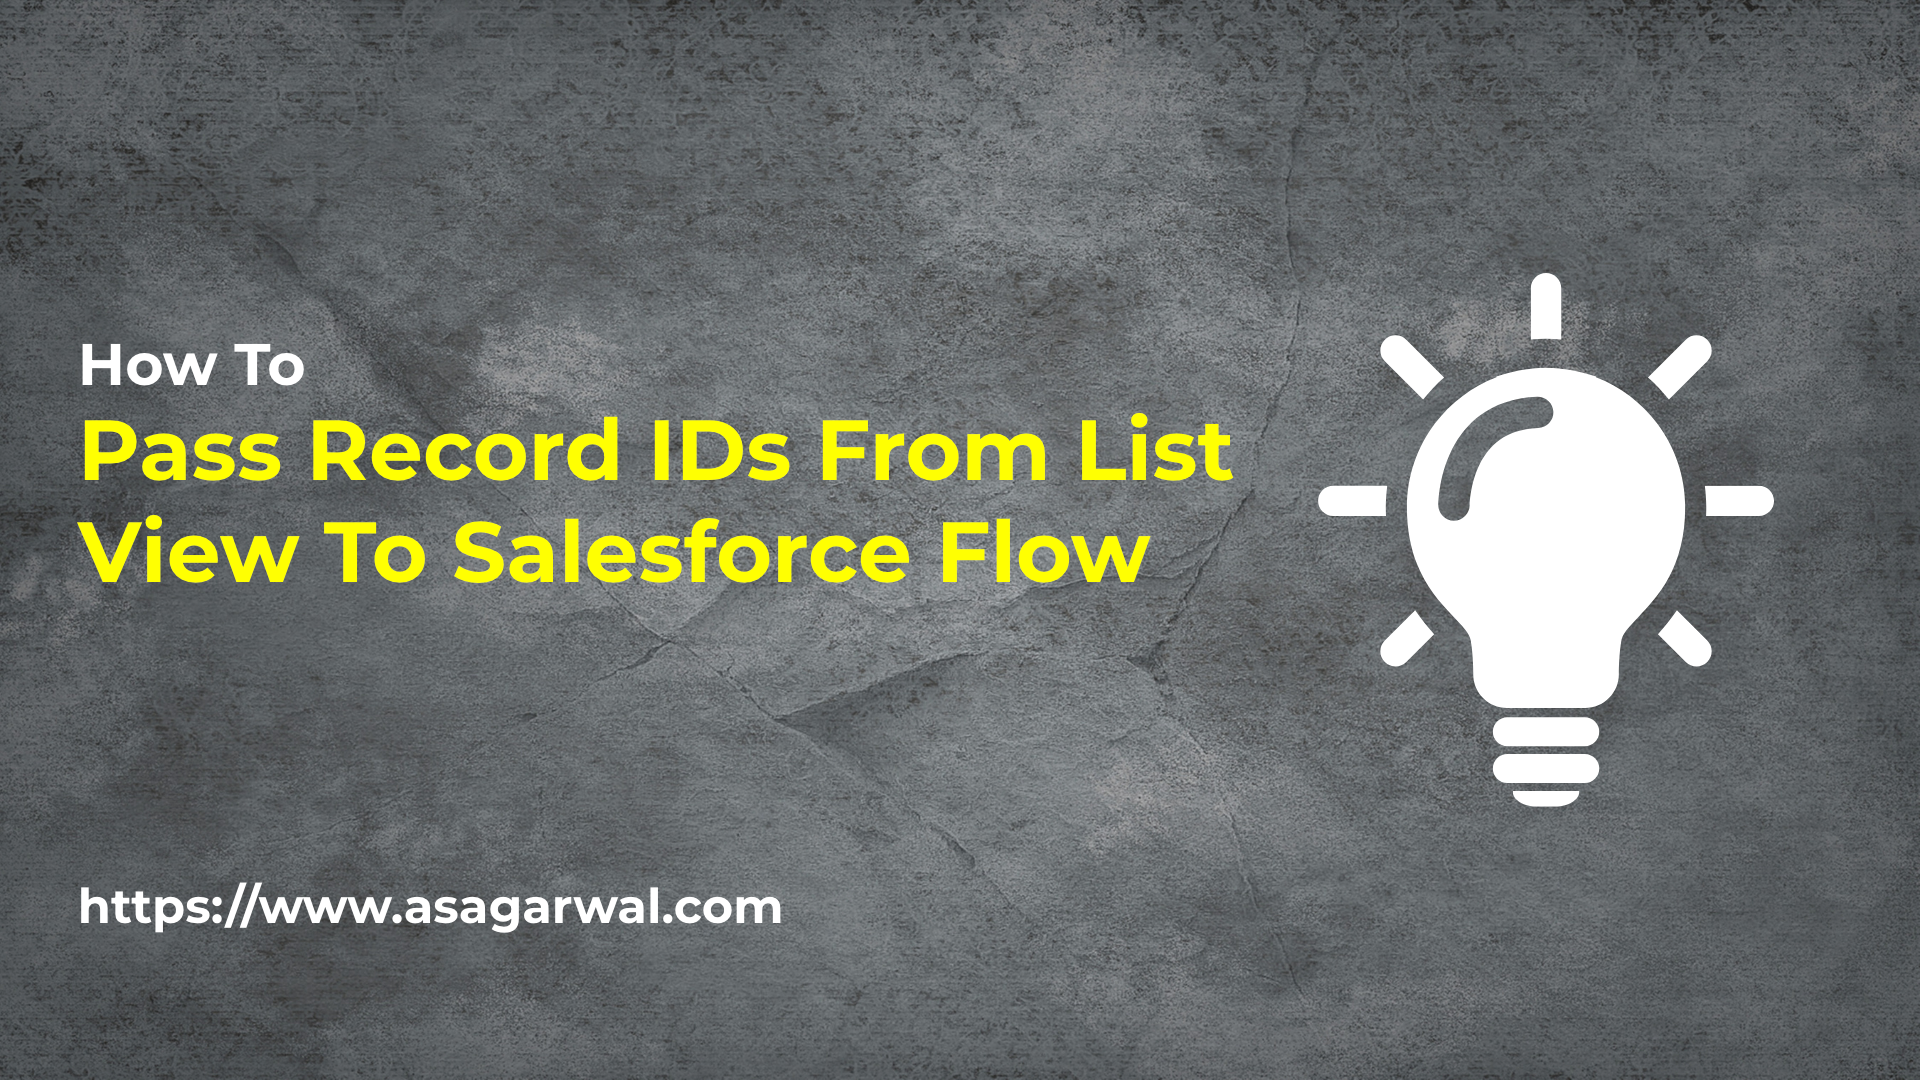 How To Pass Record IDs From List View To Salesforce Flow